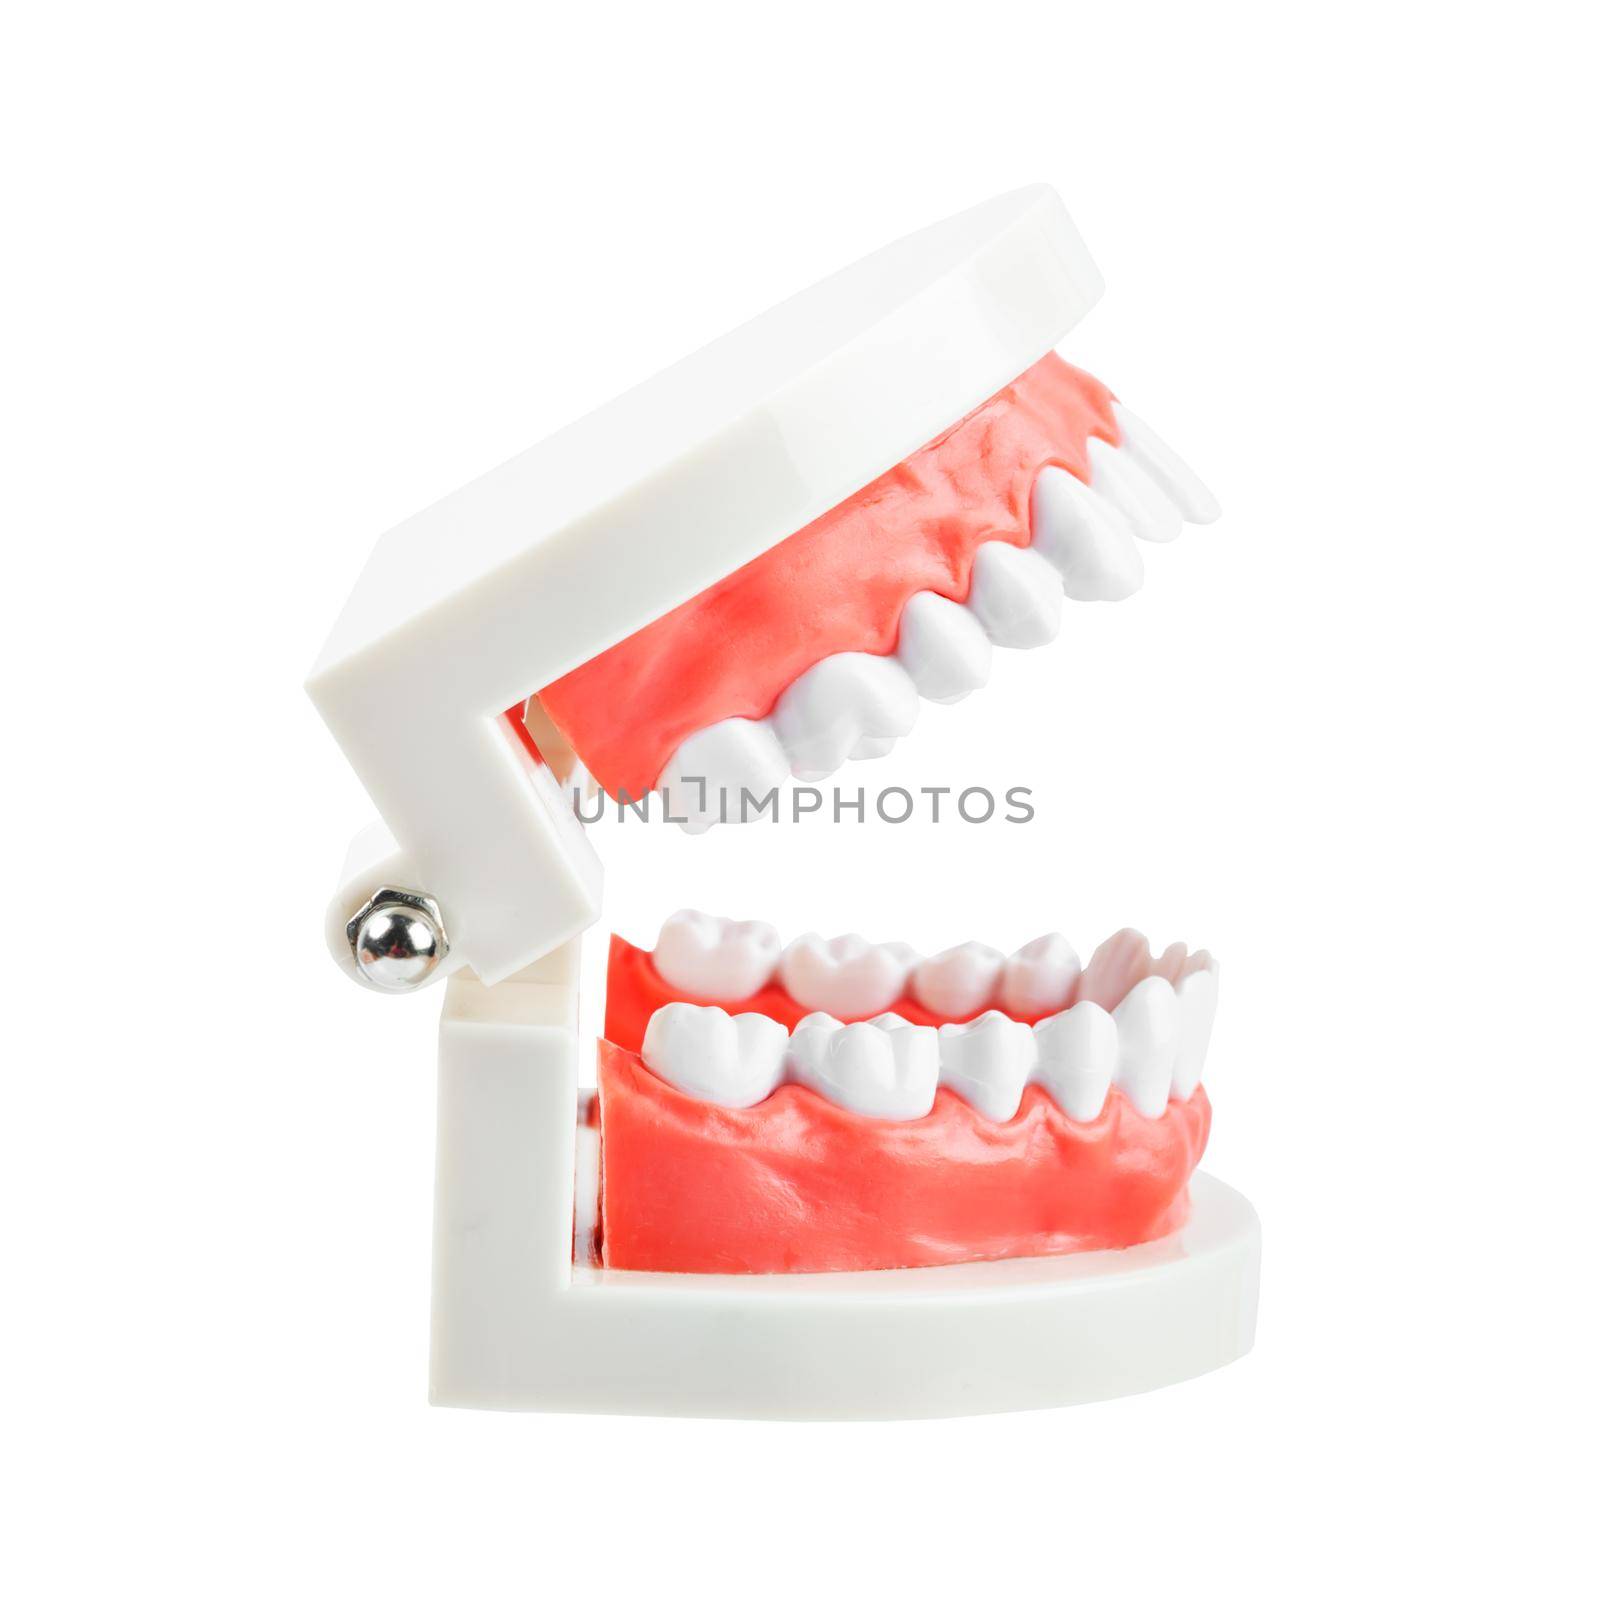 Teeth model isolated on white background, save clipping path.